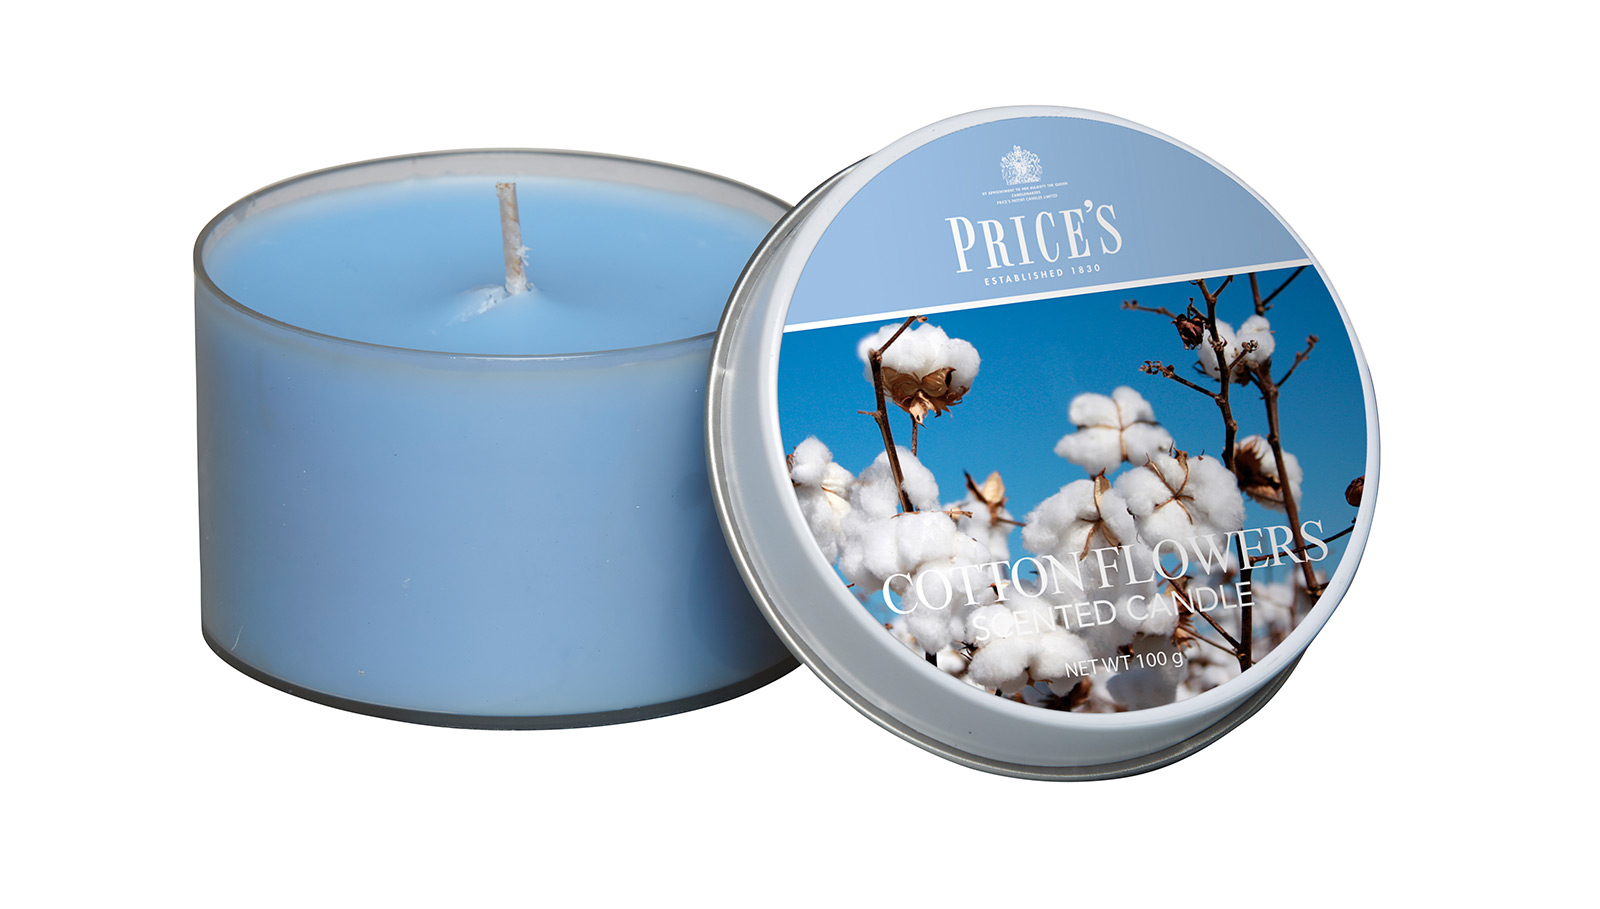 Prices Candle "Cotton Powder" 100g    